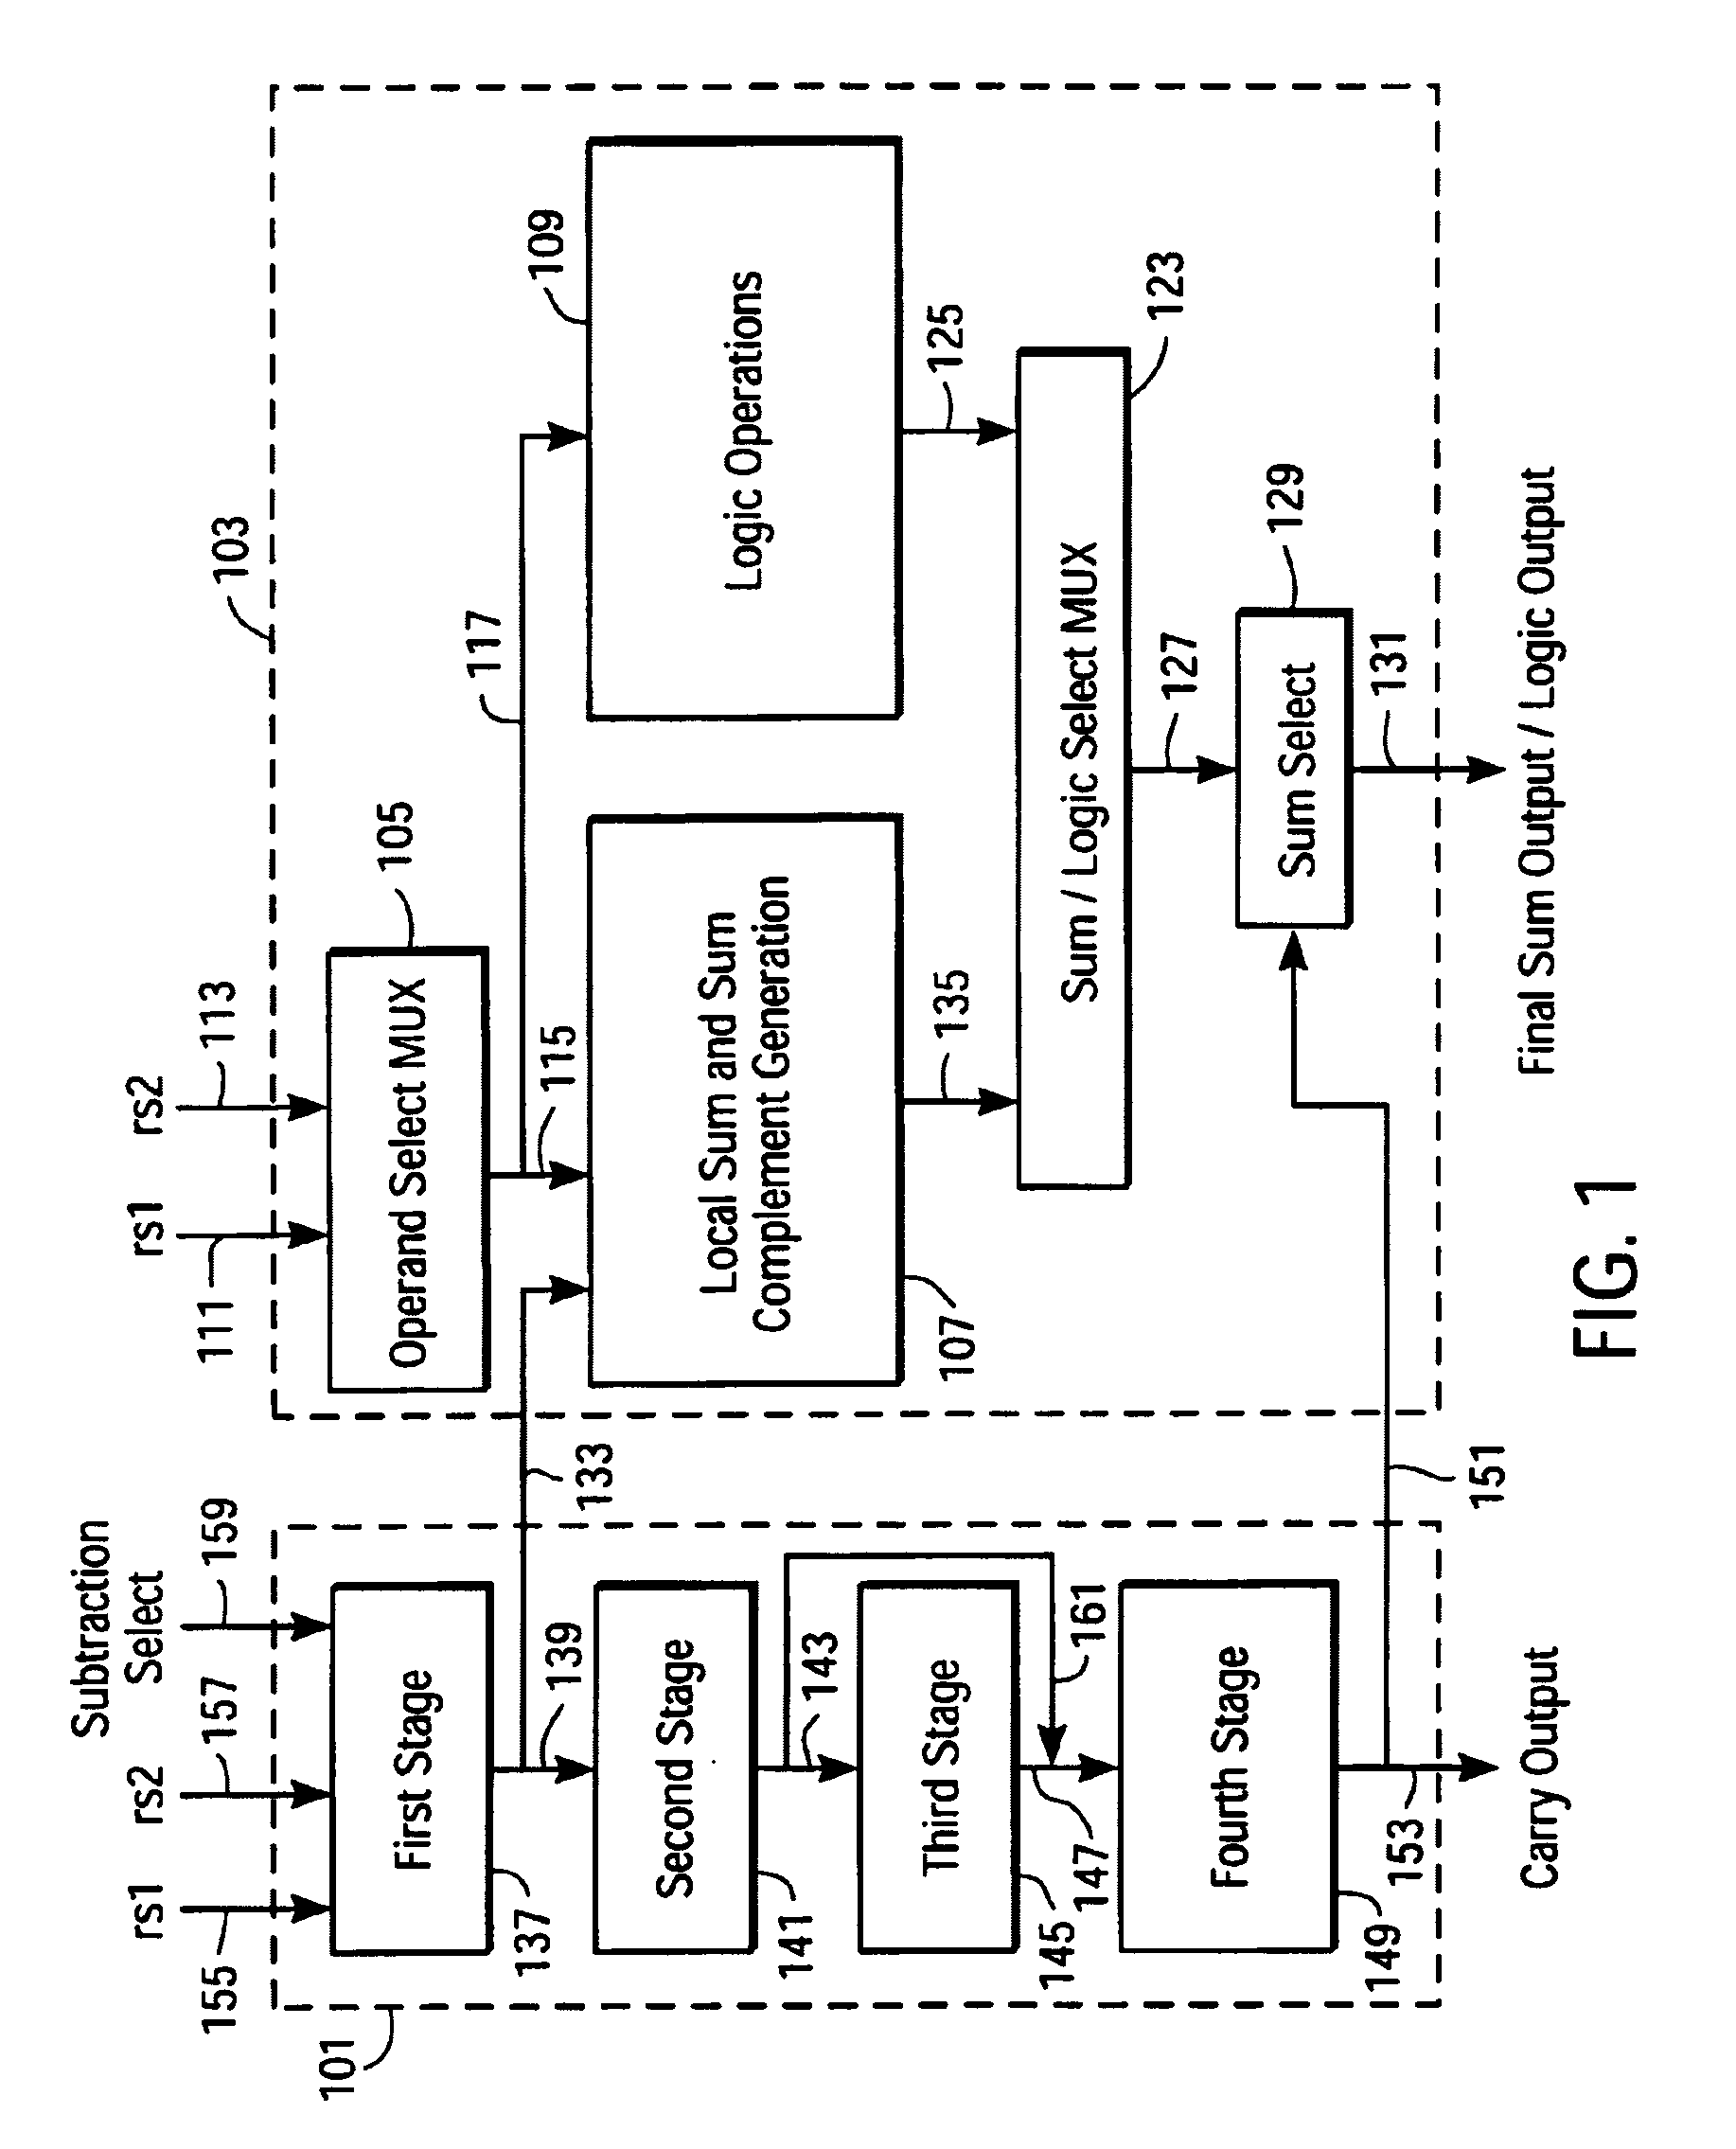 Complementary pass gate logic implementation of 64-bit arithmetic logic unit using propagate, generate, and kill